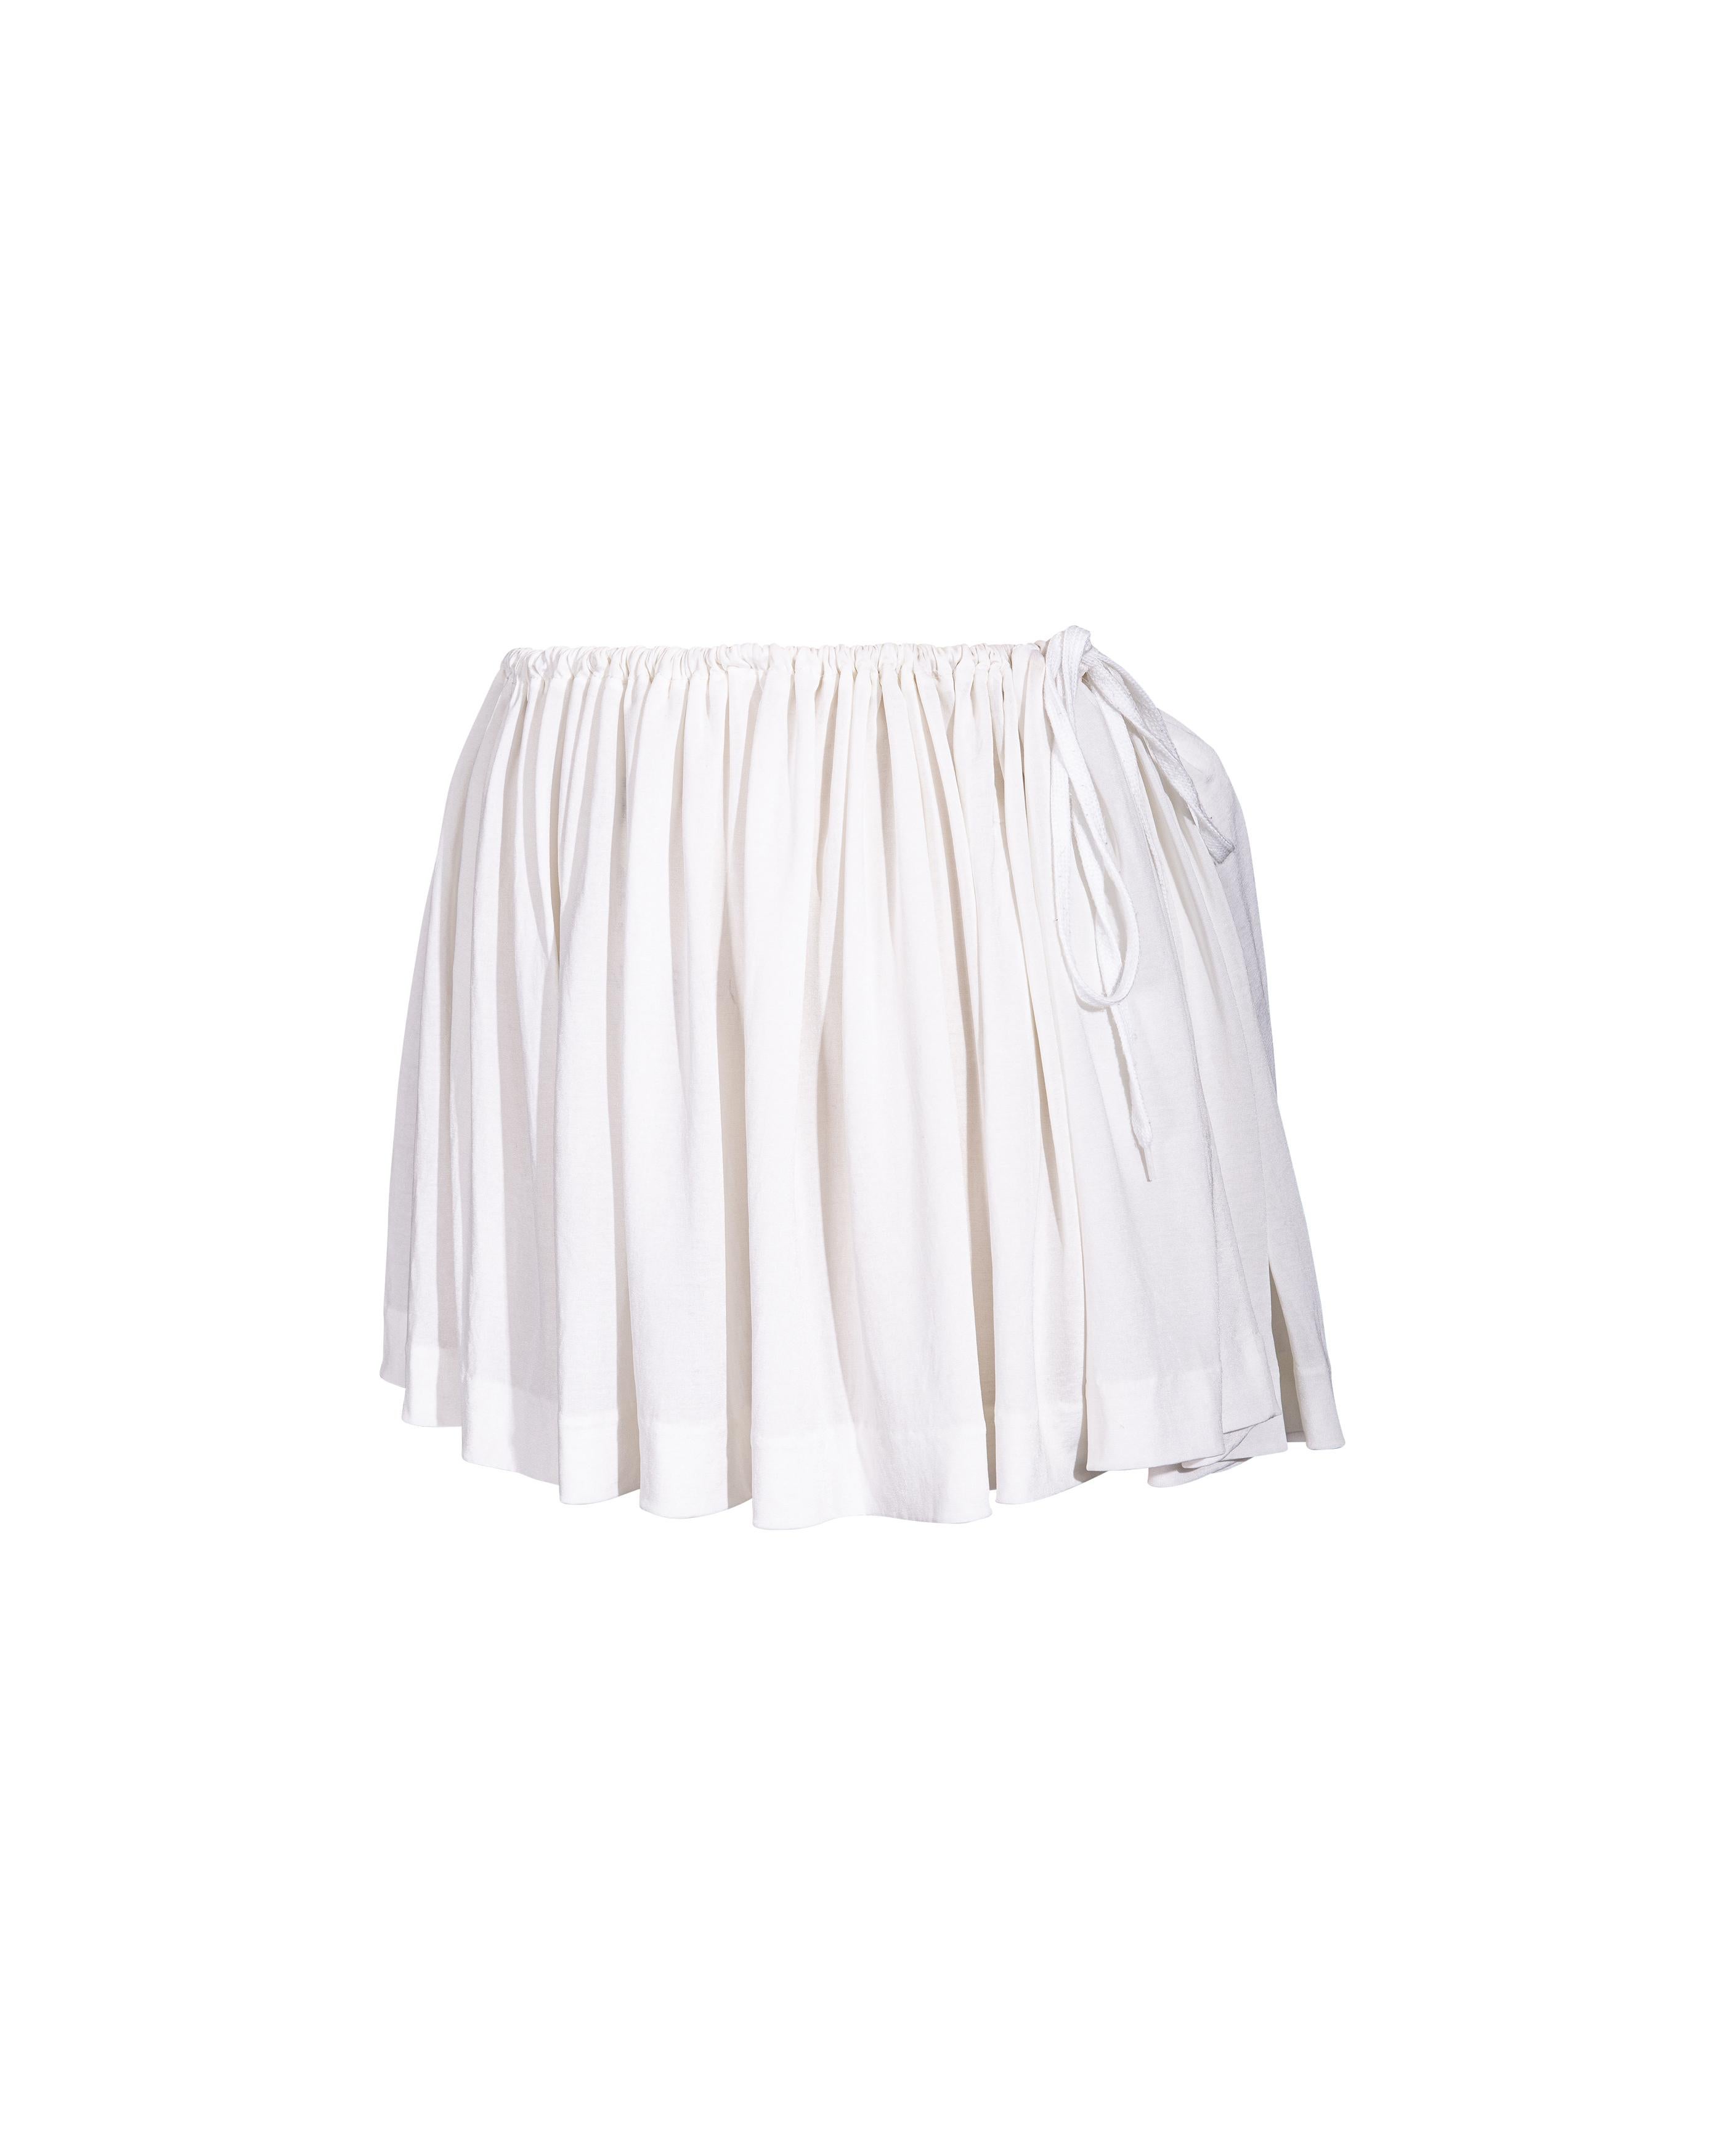 S/S 1988 Vivienne Westwood White Mini Skirt with Removable Bustle In Excellent Condition In North Hollywood, CA